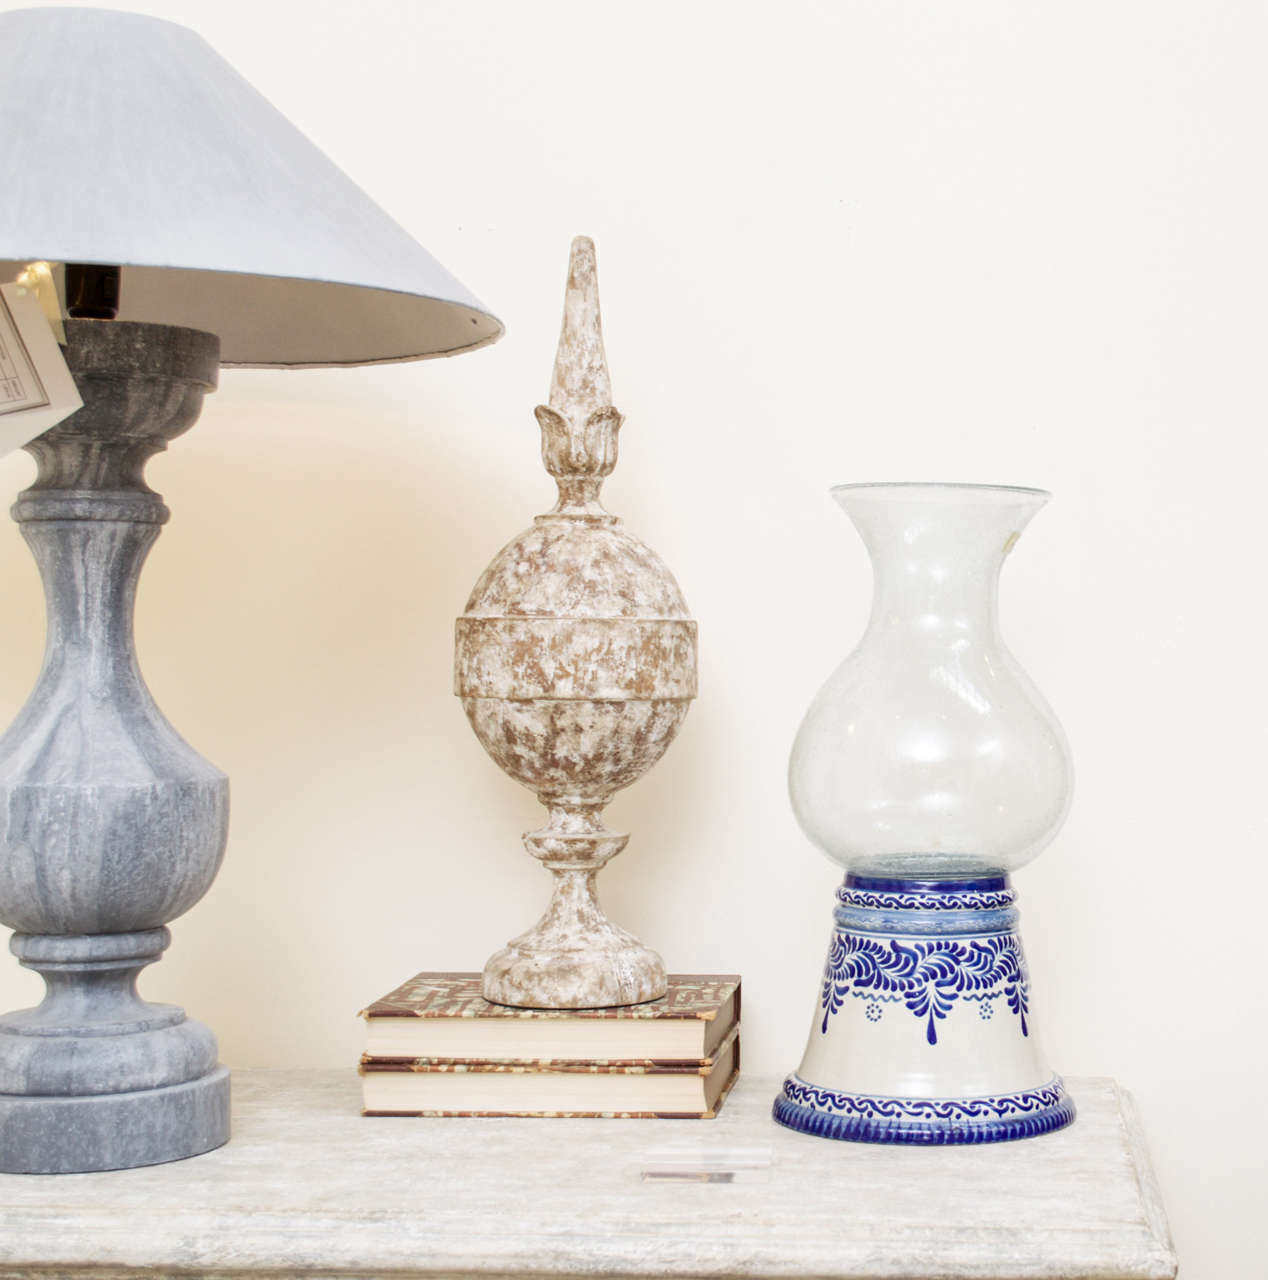 A pair of talavera hurricane lamps in blue and white design for candles